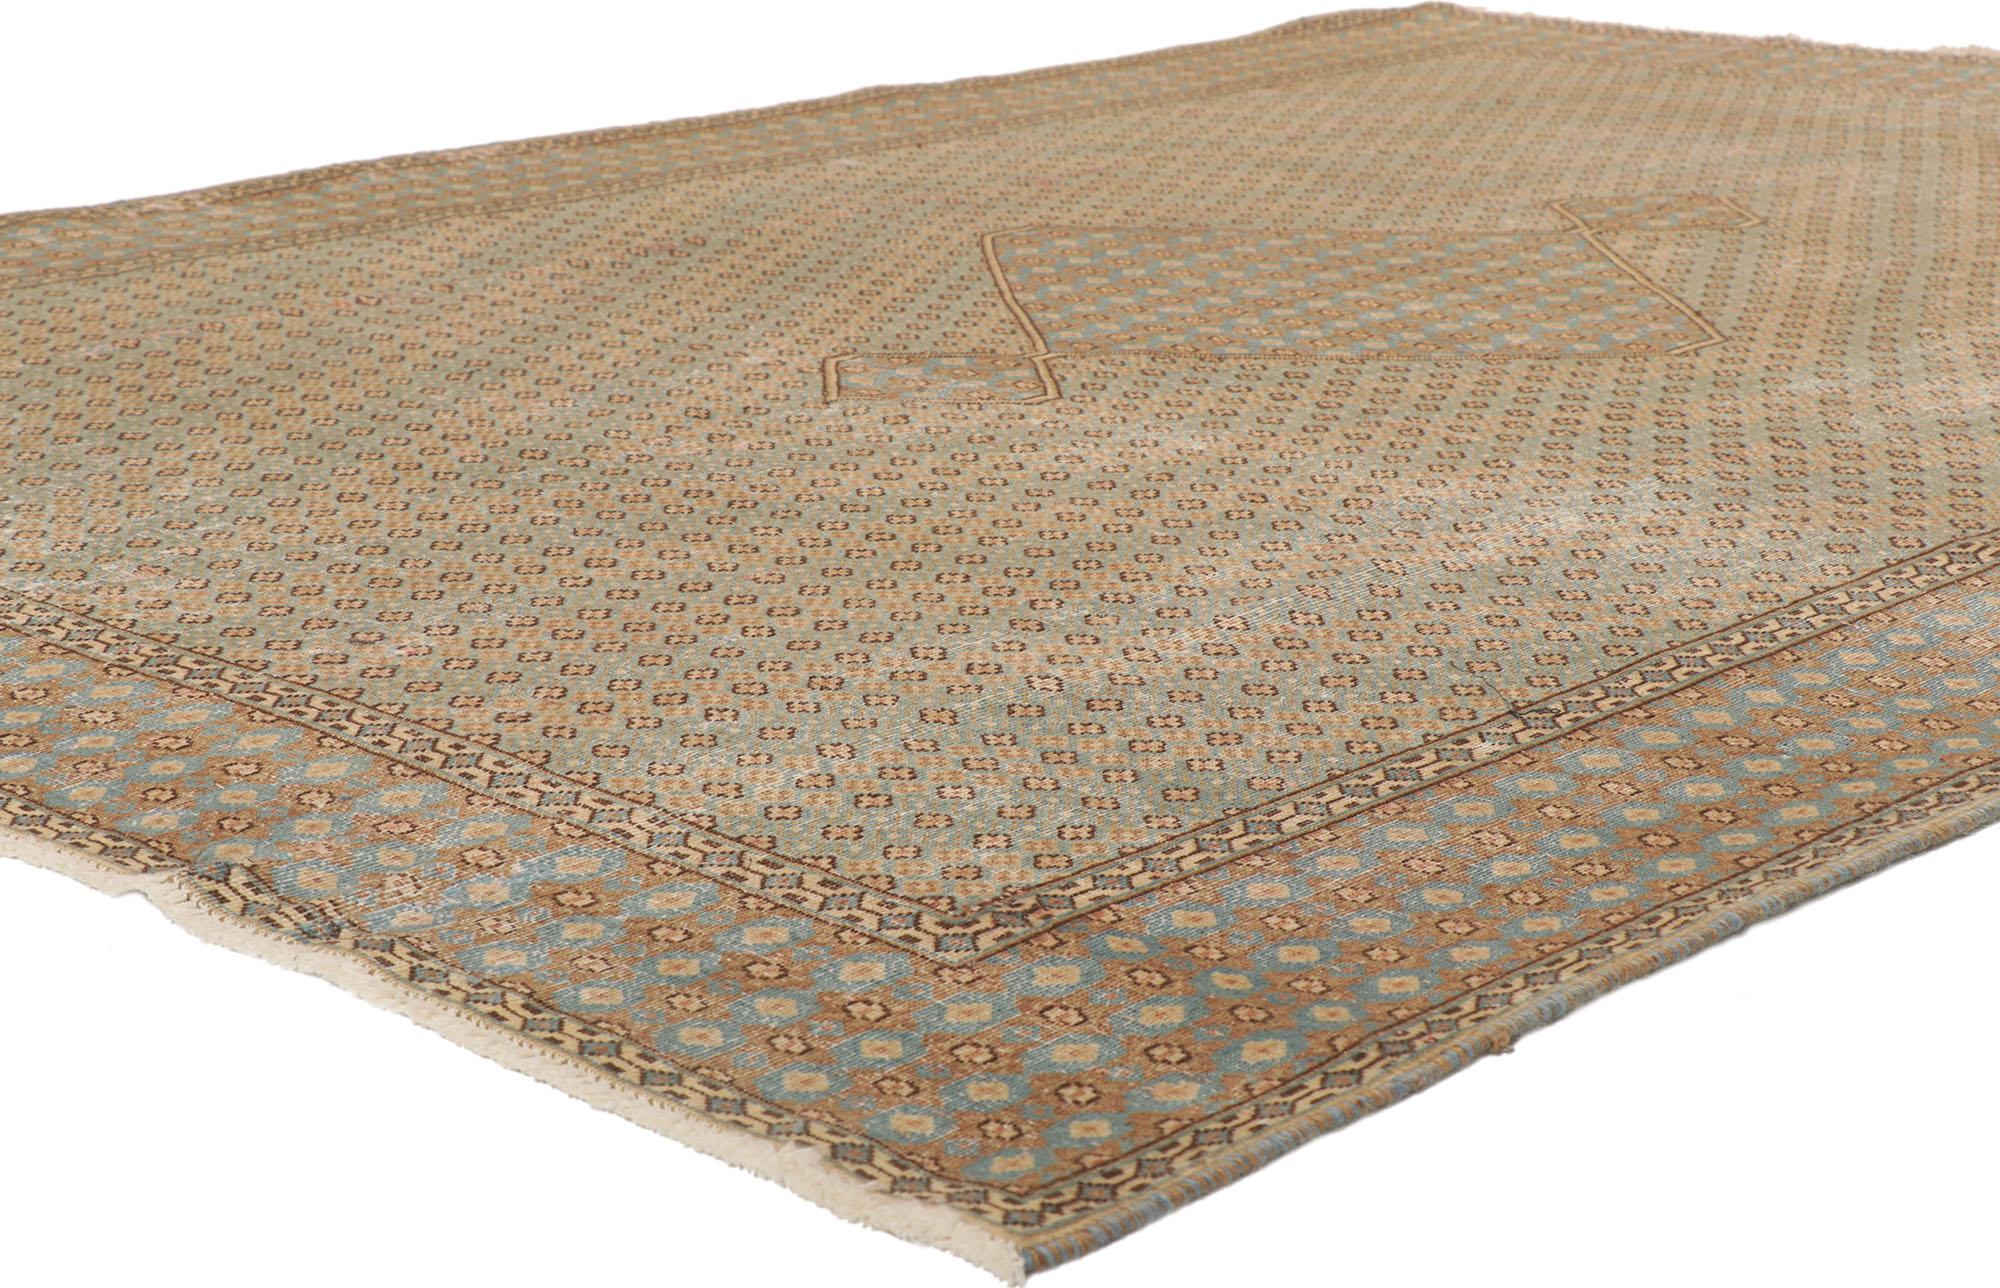 53759 Distressed Vintage Persian Kerman Rug, 06'10 x 09'06.
Laid-back luxury meets quiet sophistication in this hand knotted wool distressed vintage Persian Kerman rug. Let yourself be whisked away on a journey of tranquility, as you step onto this